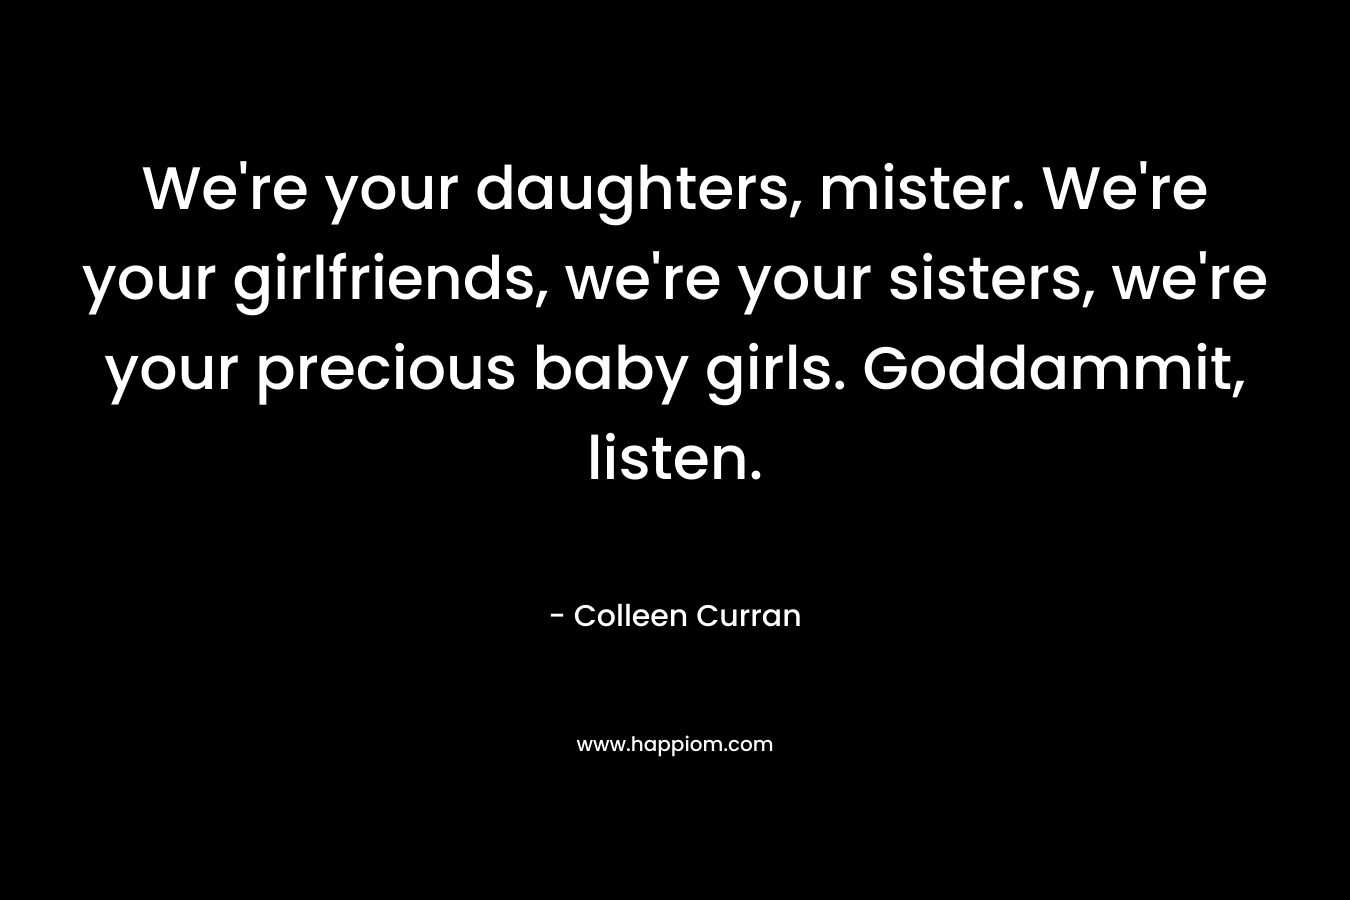 We’re your daughters, mister. We’re your girlfriends, we’re your sisters, we’re your precious baby girls. Goddammit, listen. – Colleen Curran